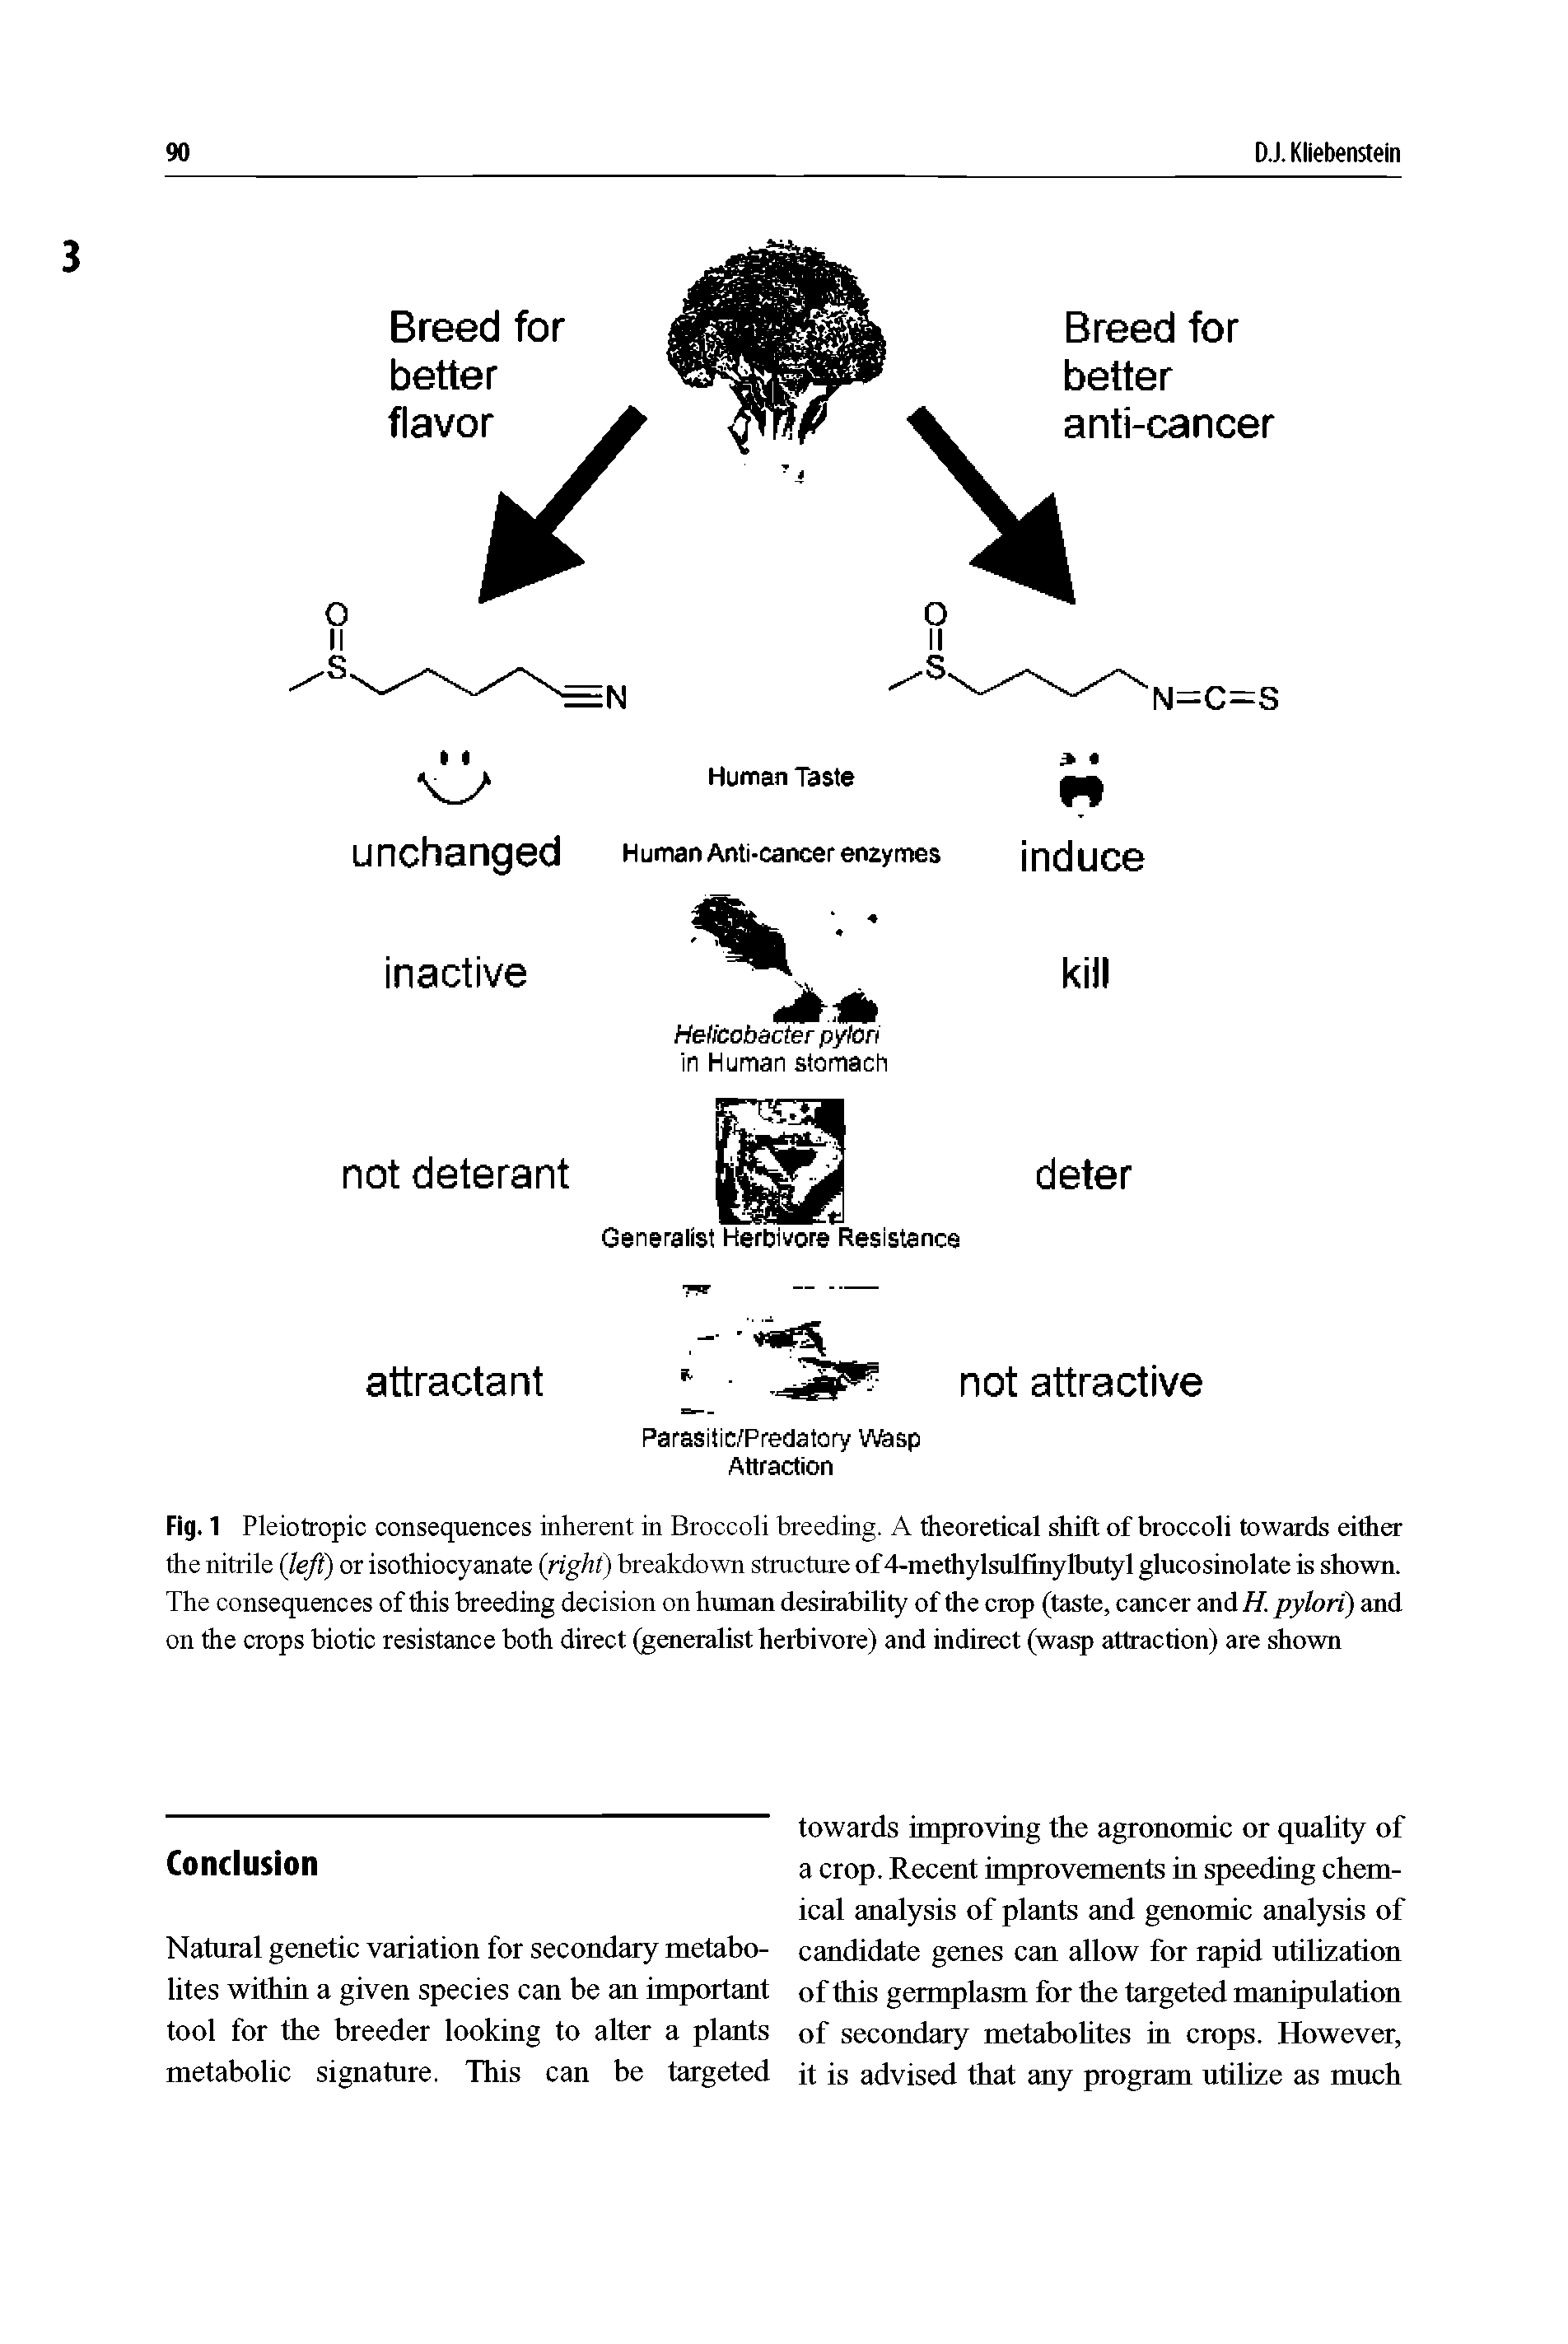 Fig. 1 Pleiotropic consequences inherent in Broccoli breeding. A theoretical shift of broccoli towards either the nitrile (left) or isothiocyanate (right) breakdown structure of 4-methylsulfinylbutyl glucosinolate is shown. The consequences of fliis breeding decision on human desirability of the crop (taste, cancer and H. pylori) and on the crops biotic resistance both direct (generalist herbivore) and indirect (wasp attraction) are shown...